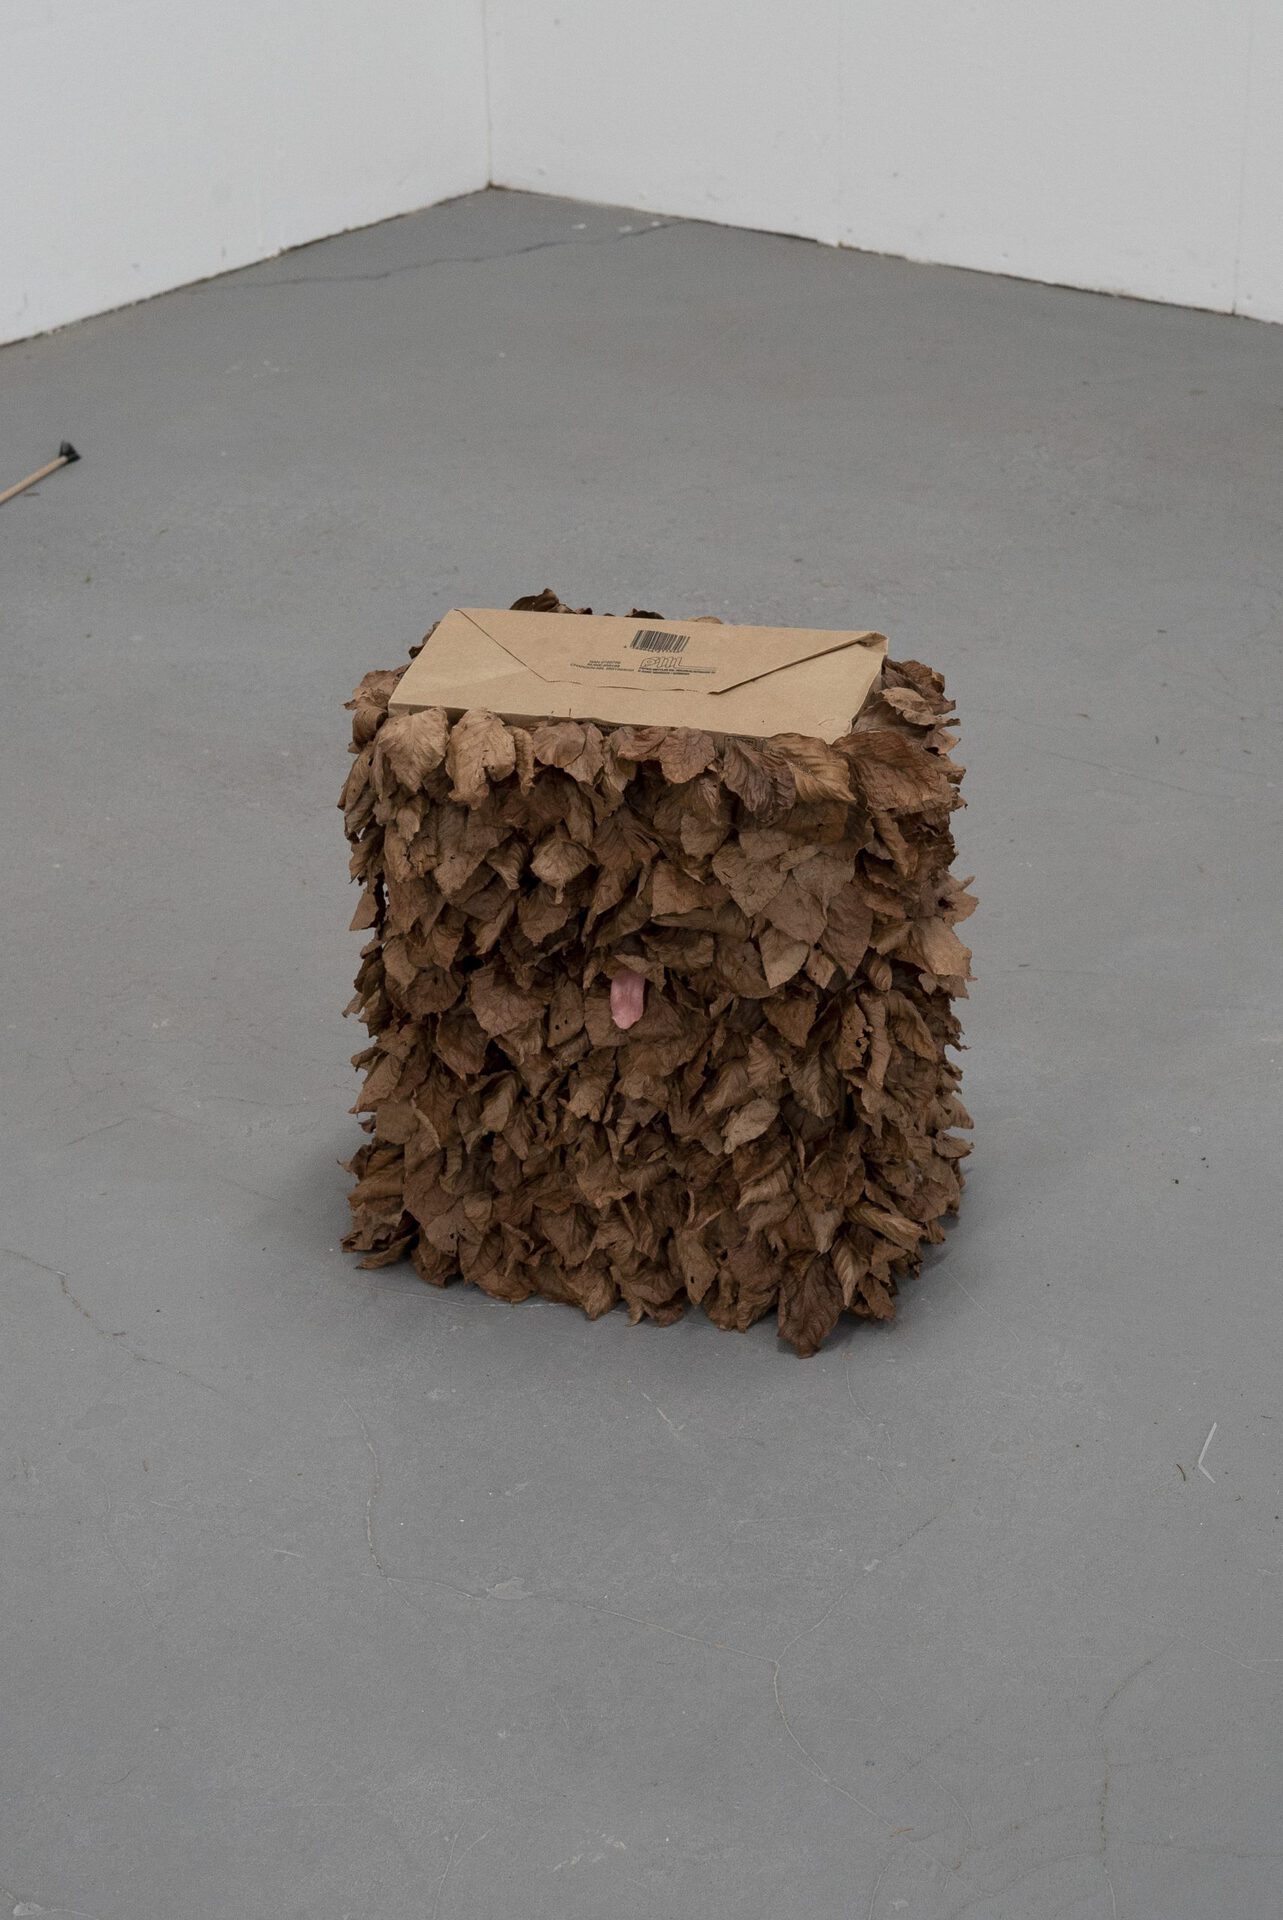 Vincent Scheers, The neighbours, 2020, Paperbag,leaves, taxidermy tongue, 20x40x60cm